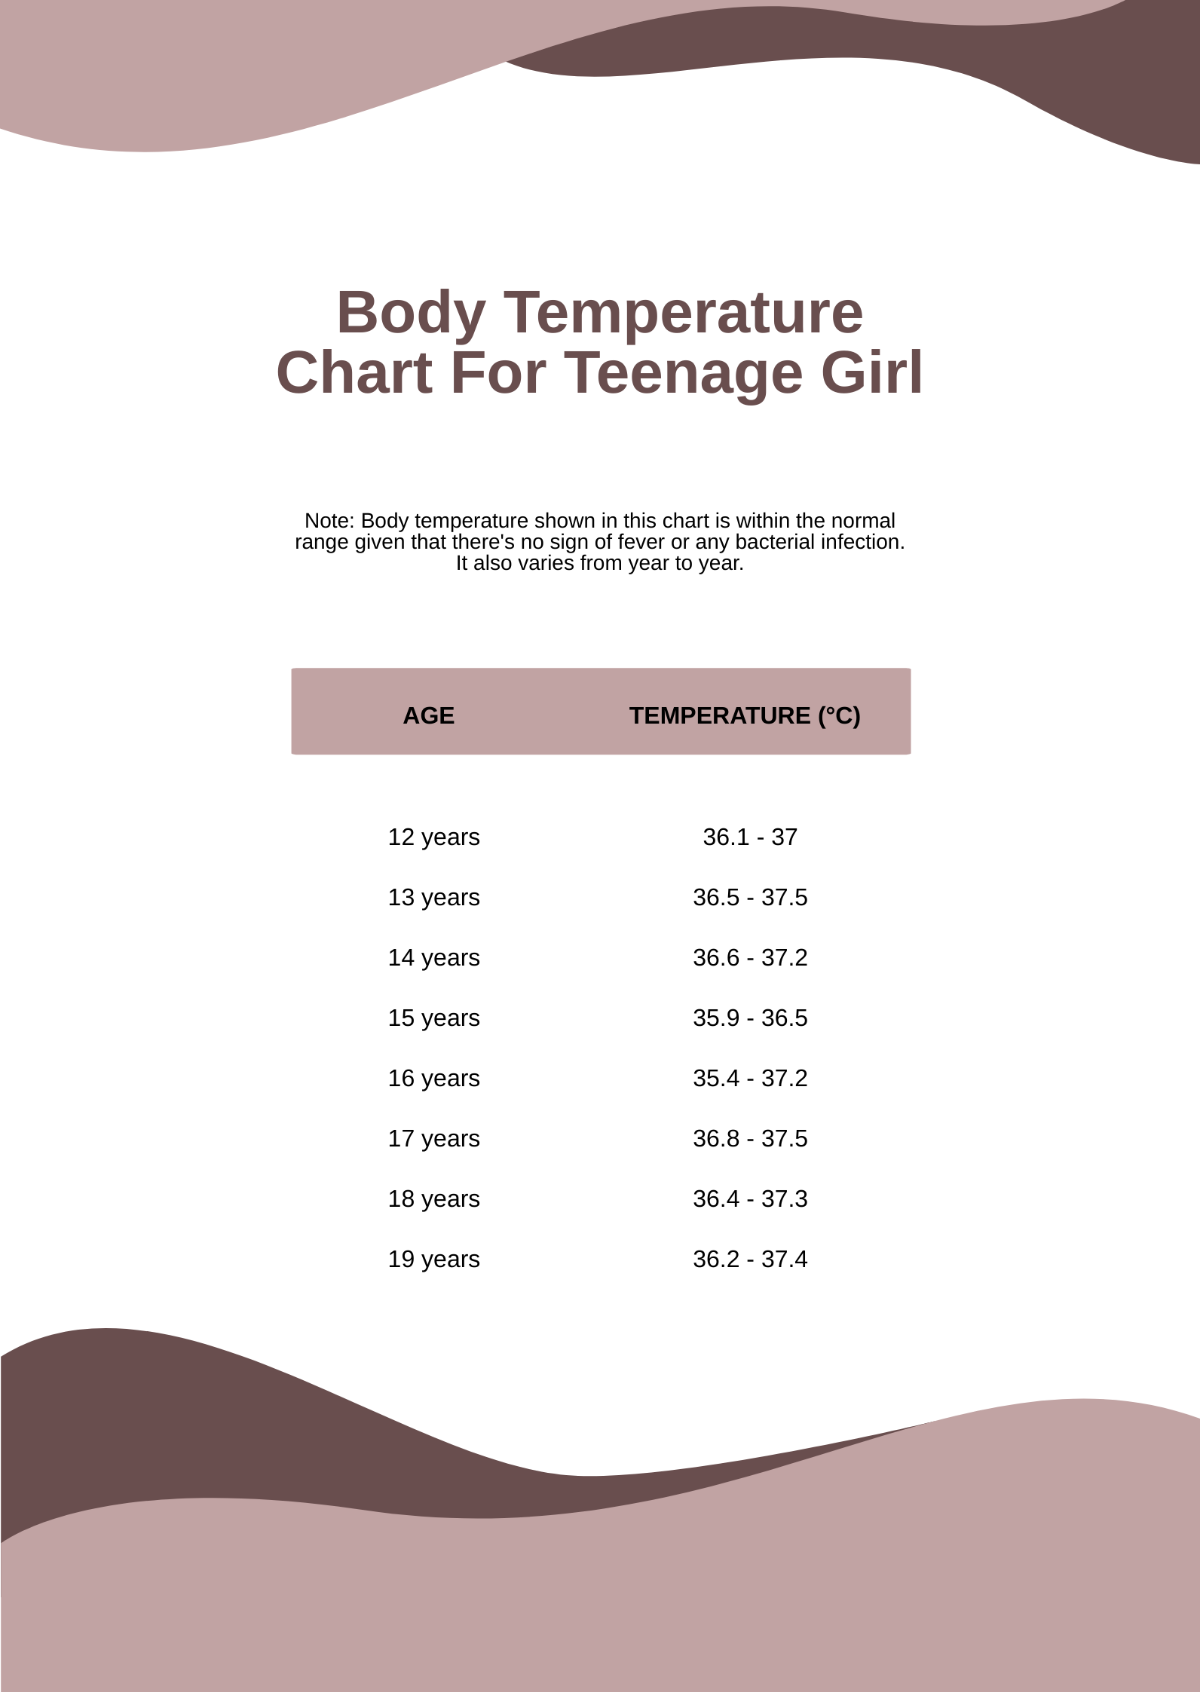 Body Temperature Chart For Teenage Girl Template